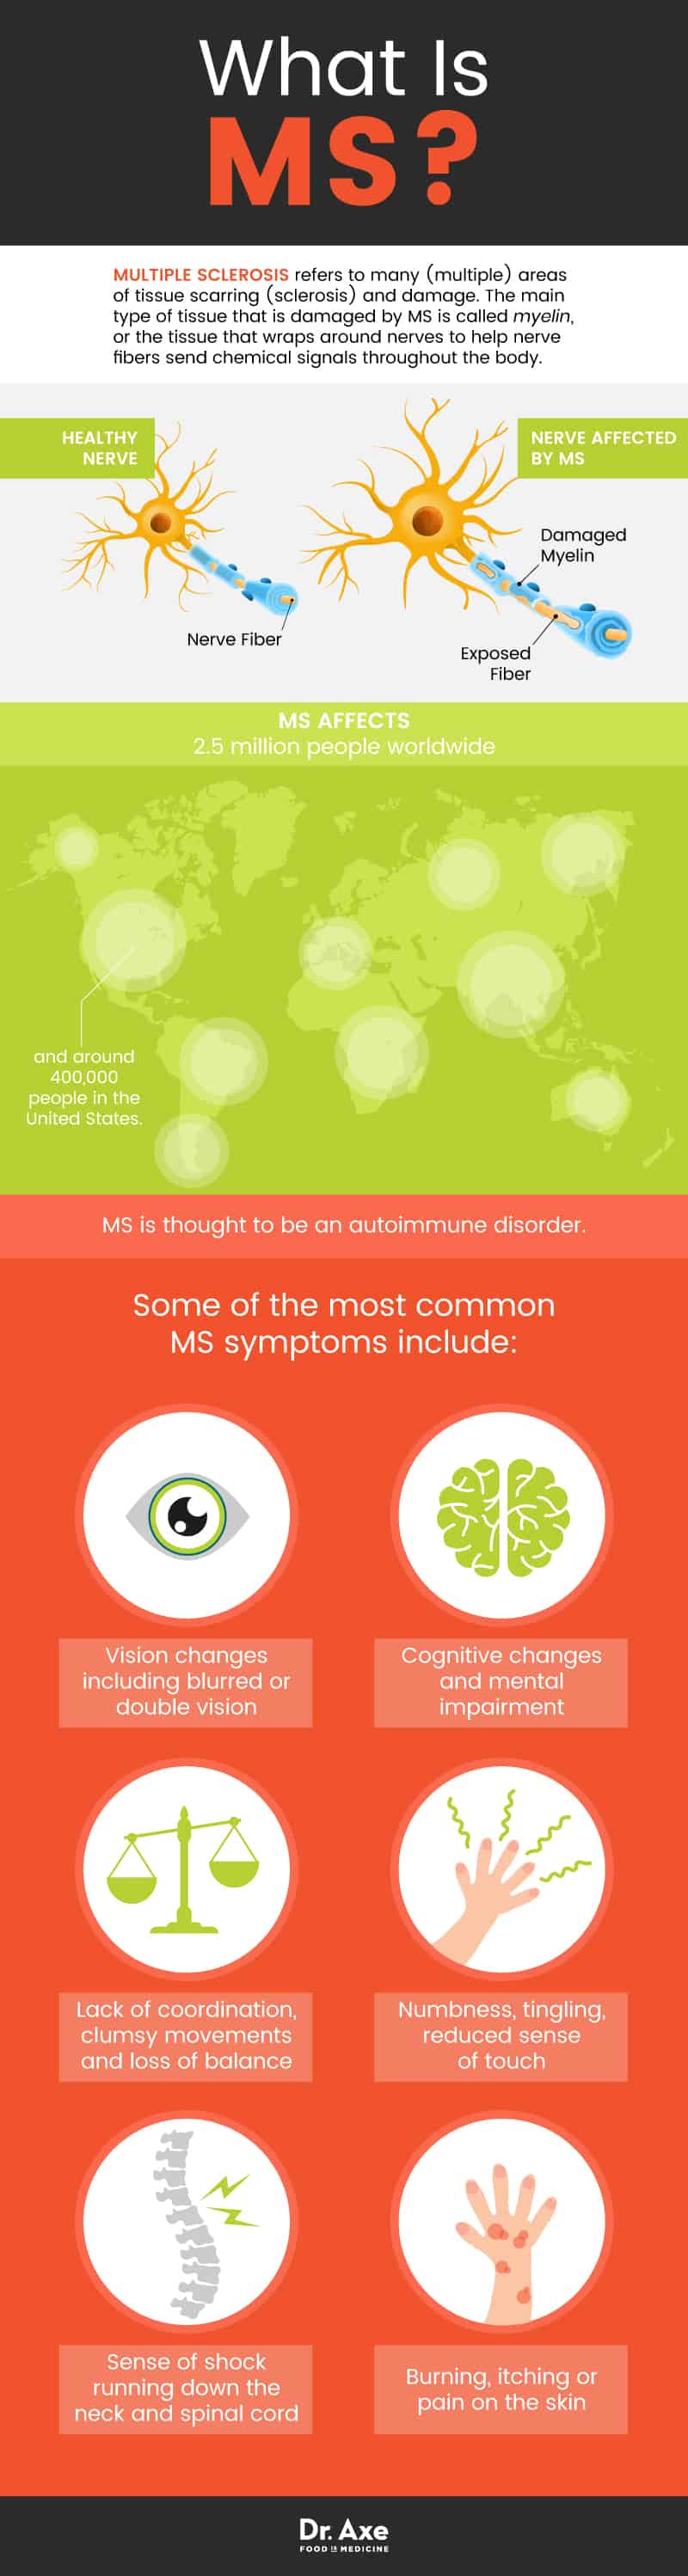 Multiple sclerosis: What is MS?